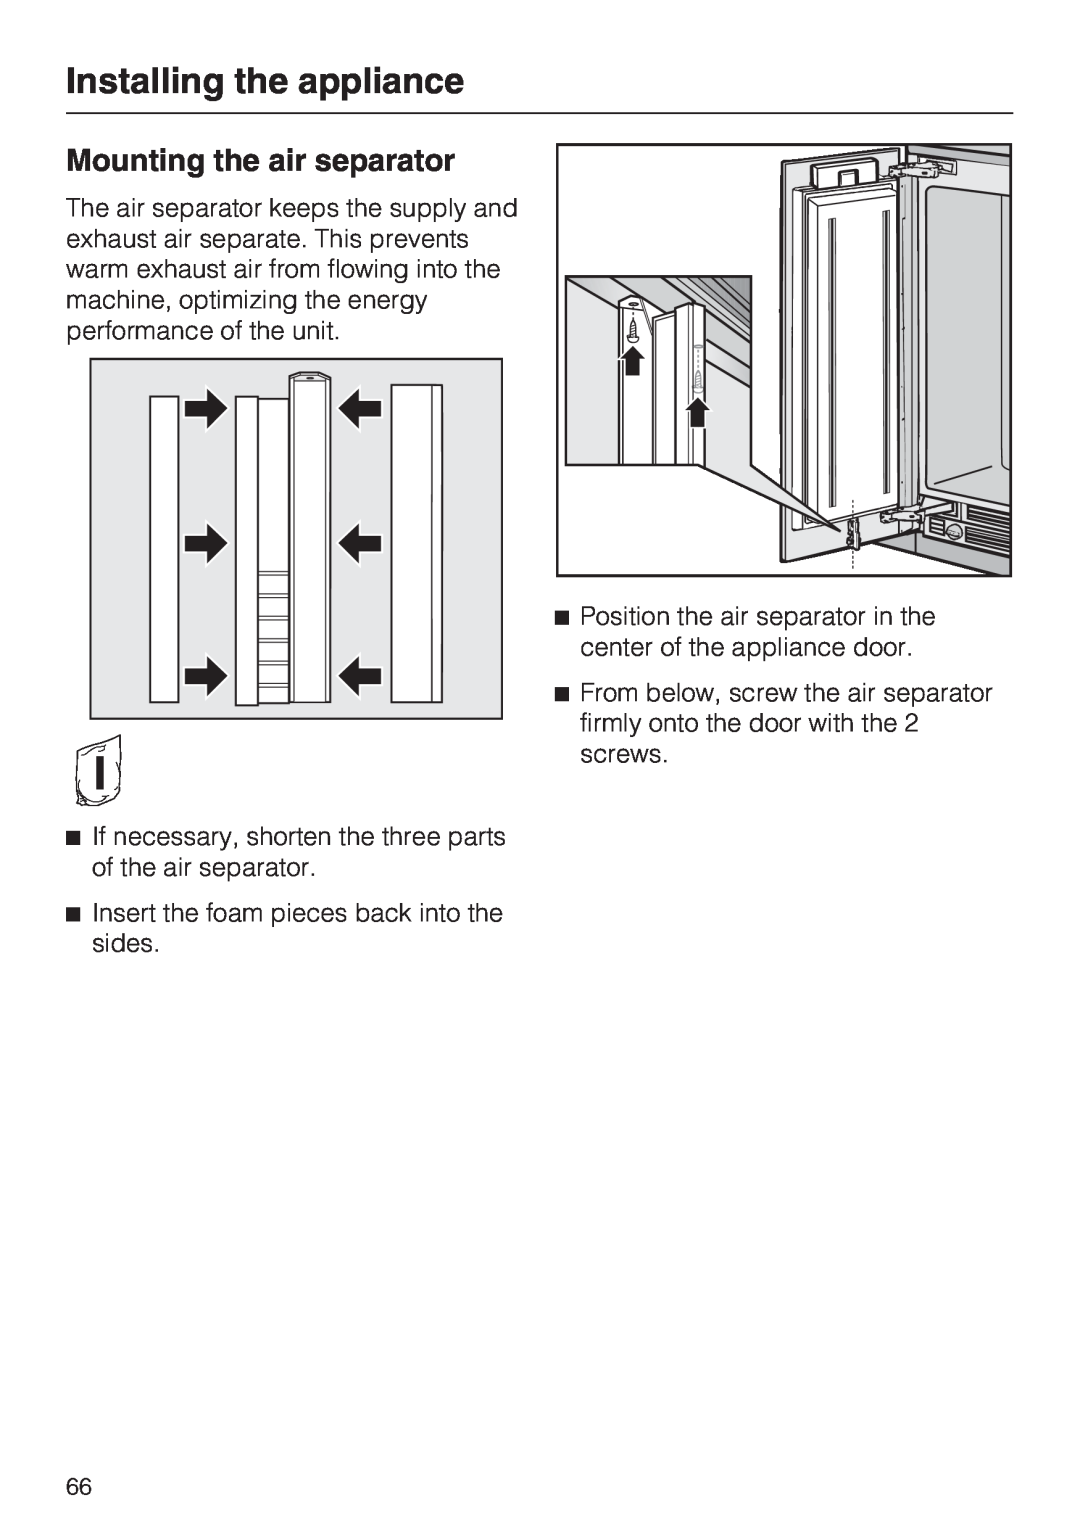 Miele F1411VI installation instructions Mounting the air separator, Installing the appliance 